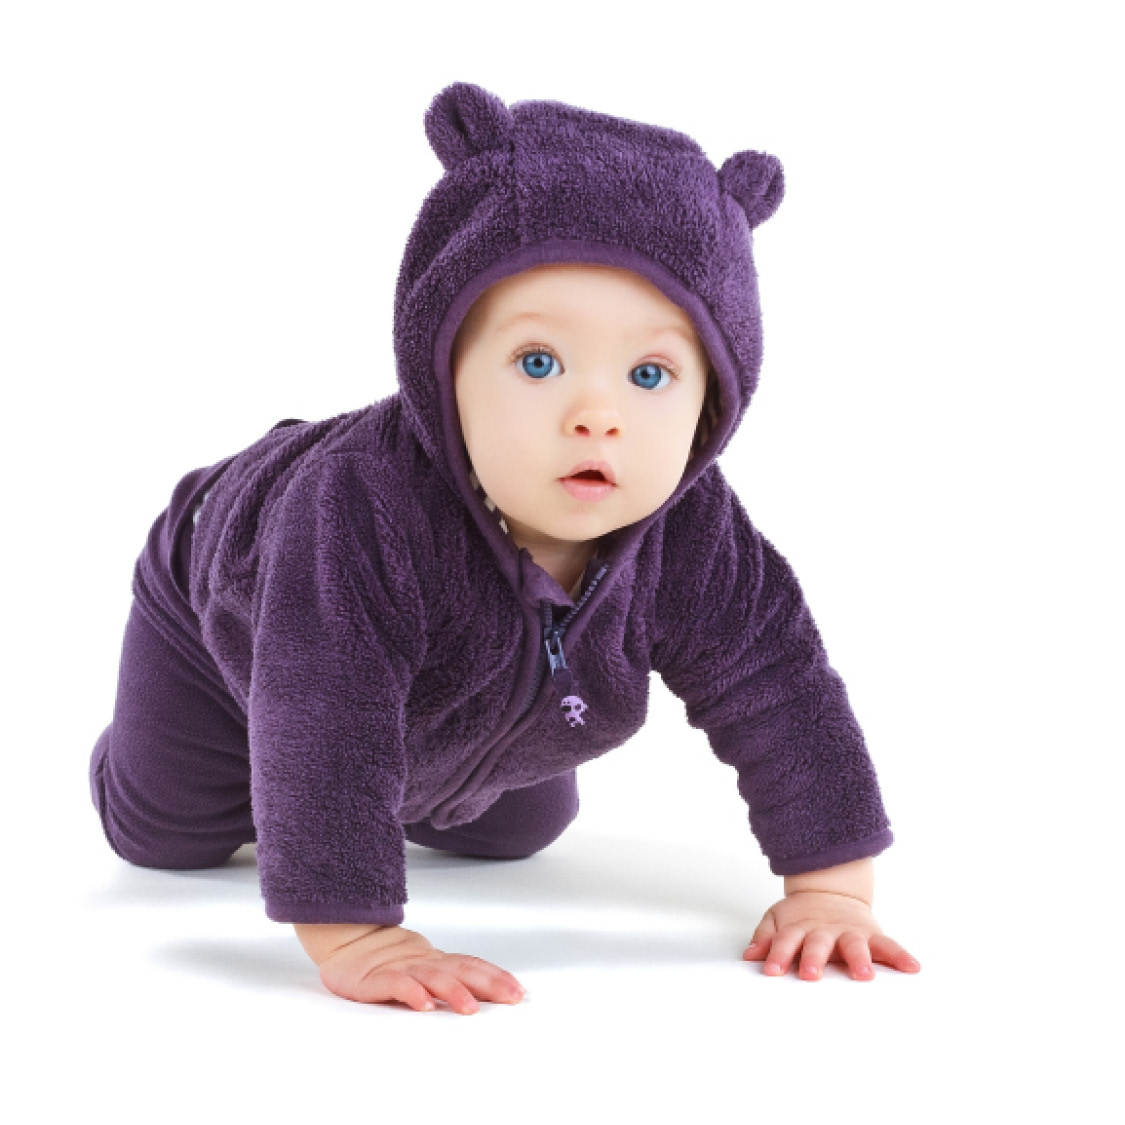 Some parents dress their babies in costumes This baby is dressed up as a bear - photo 17